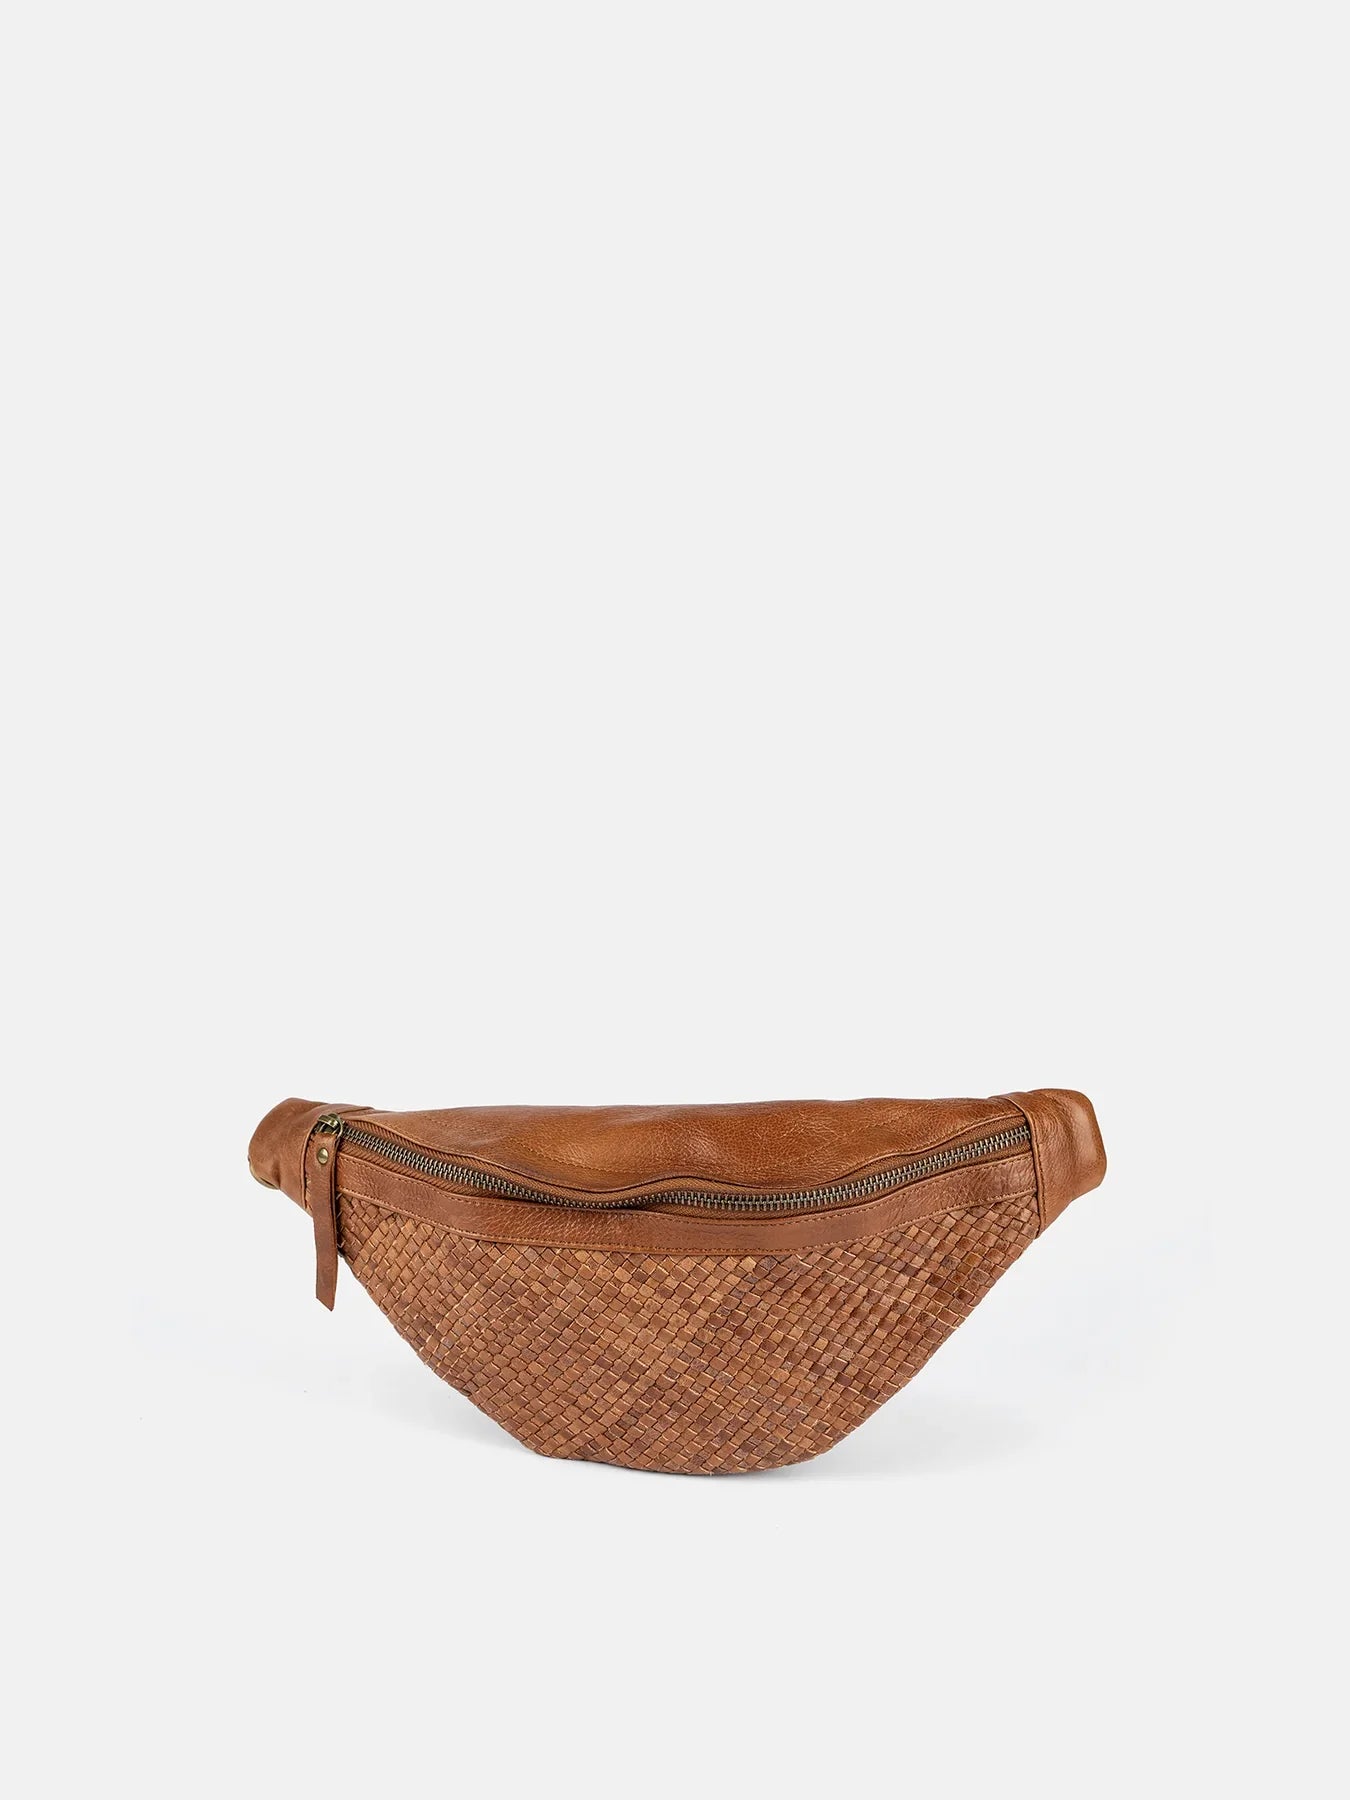 Leather Bumbag, Abarna Urban, Walnut, From Re:Designed (7017422356542)